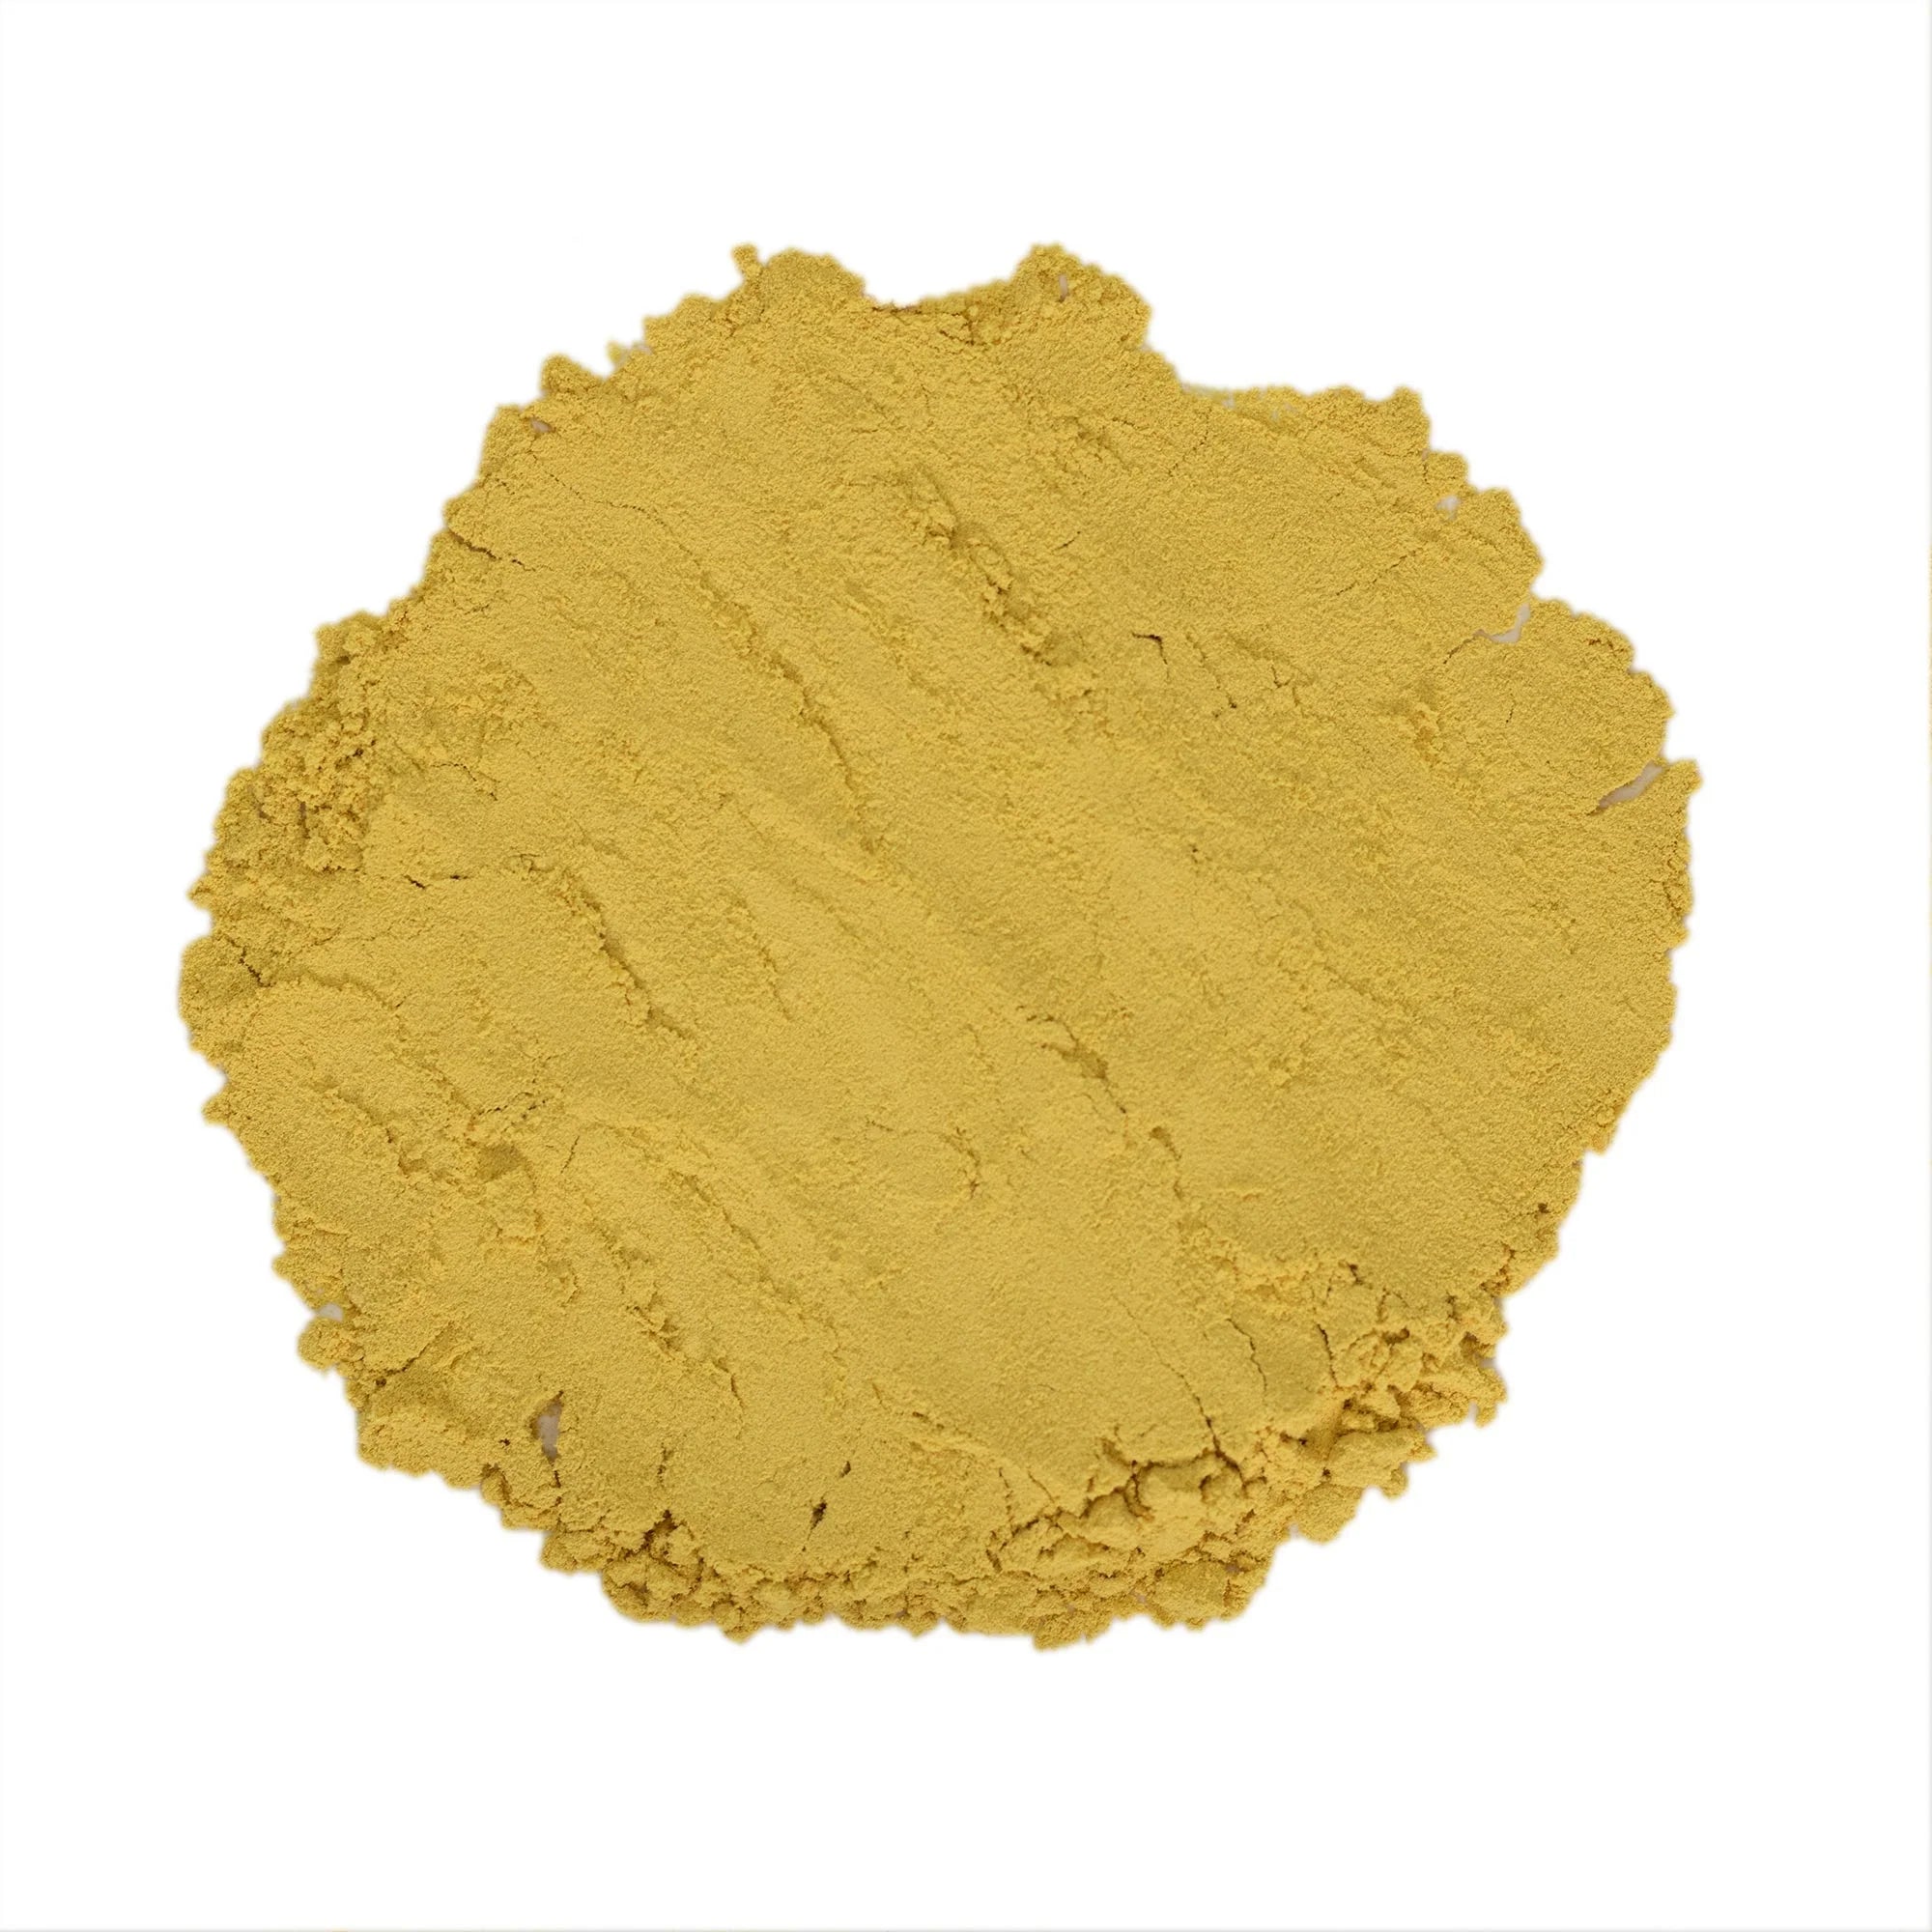 Pine Pollen Powder – wild harvested, cell wall cracked